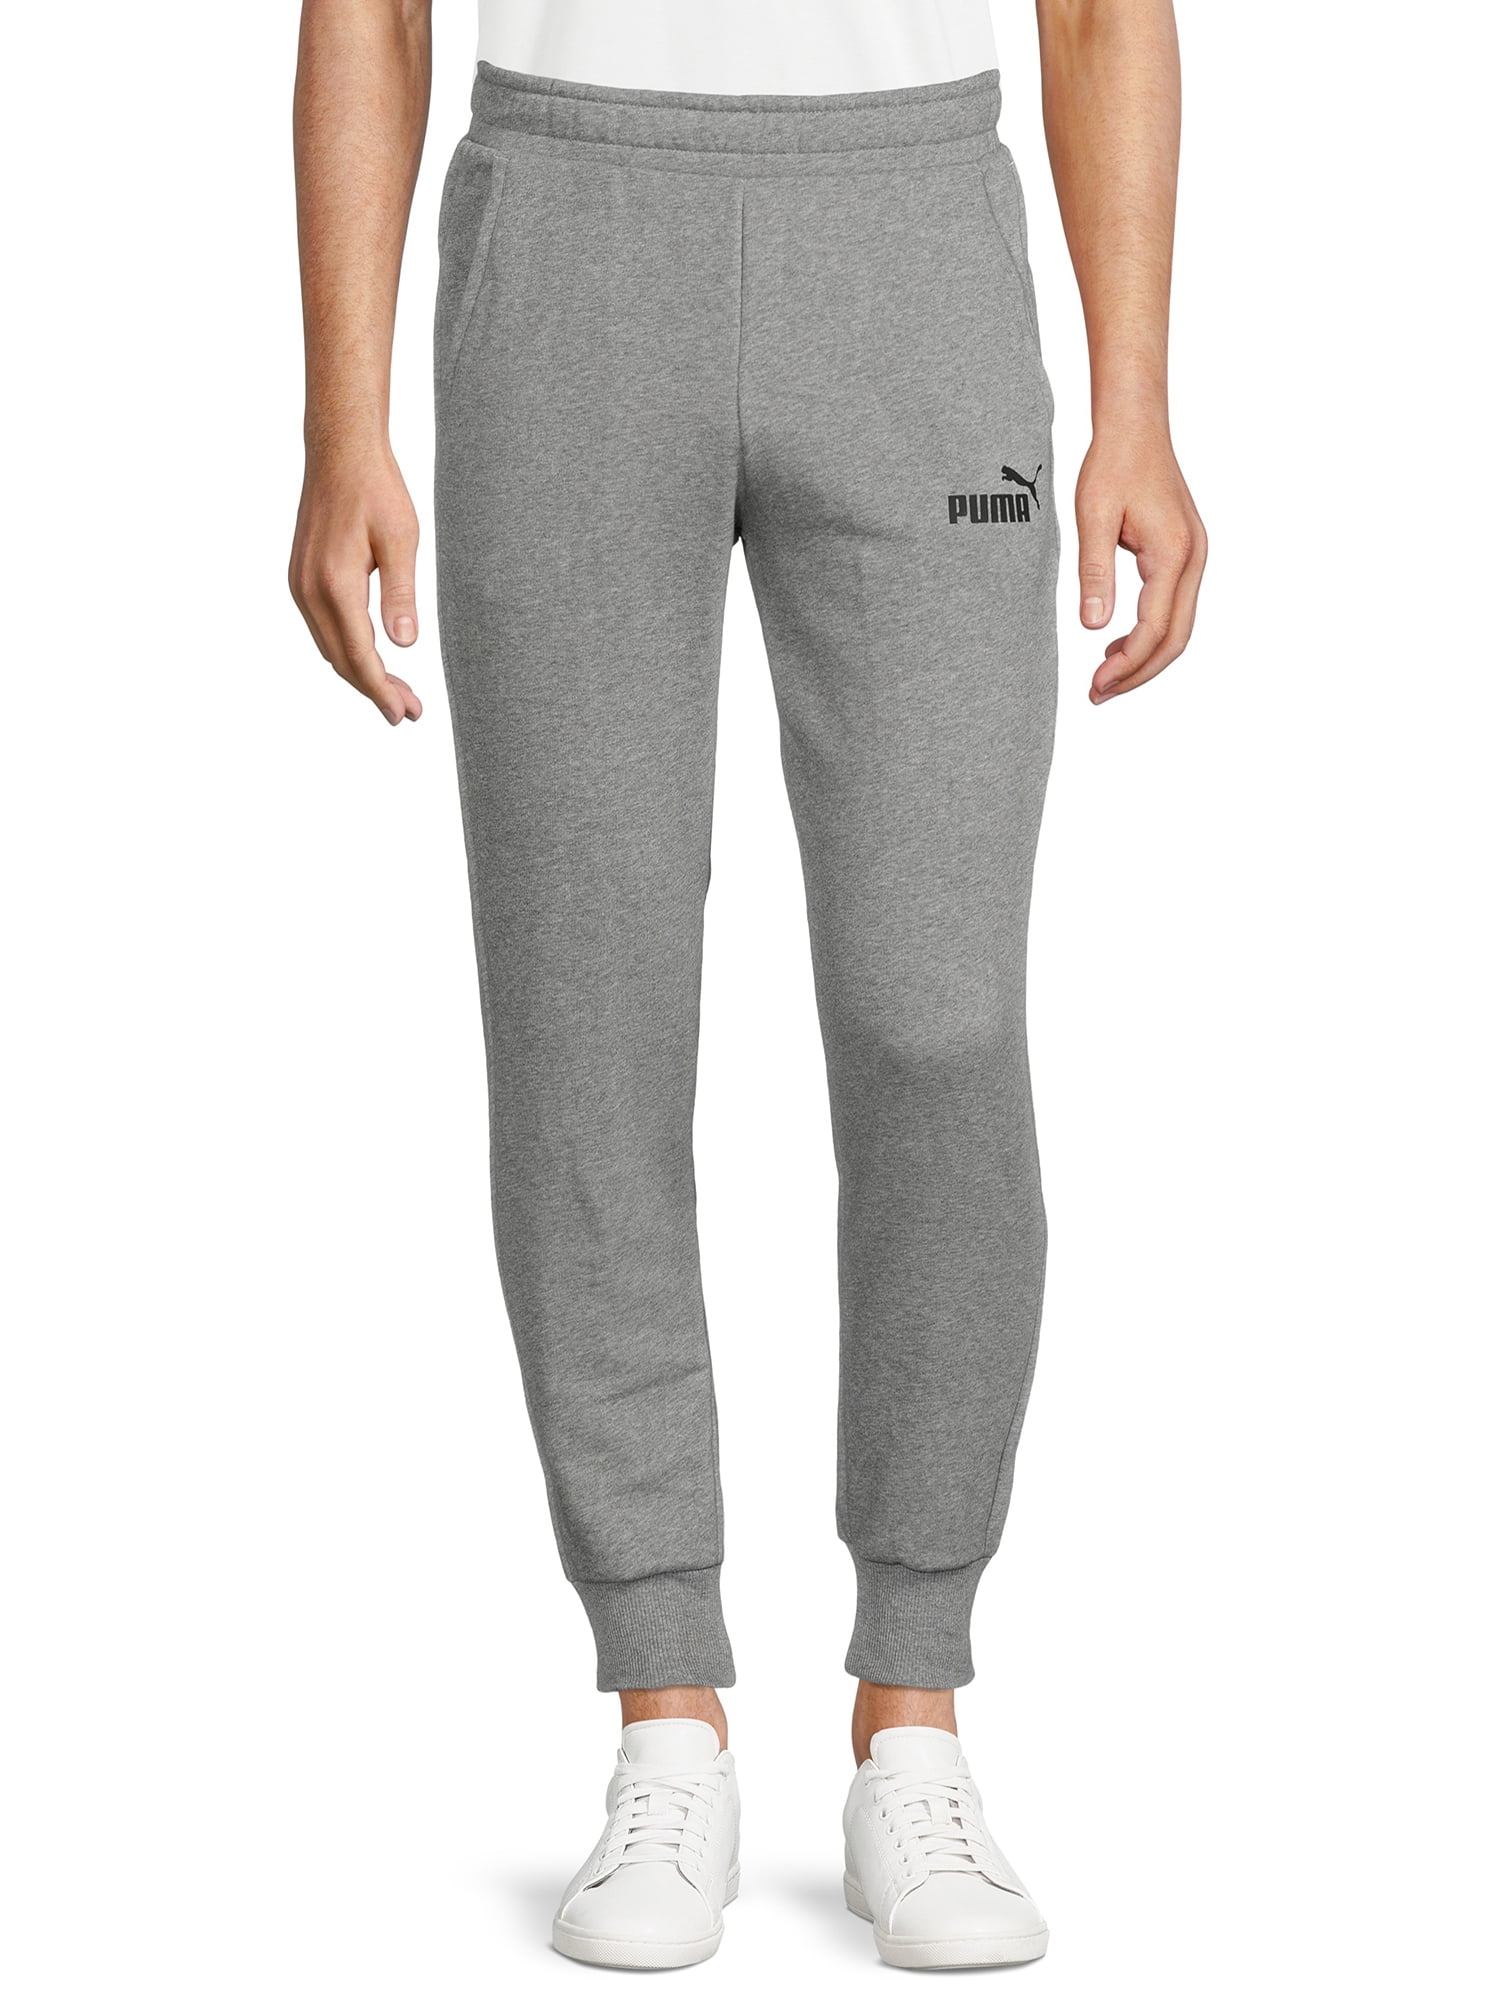 At Costco: Puma Fleece Jogger in multiple colors and sizes for $21.99 -  Definitely my favorite pair of sweatpants! : r/frugalmalefashion